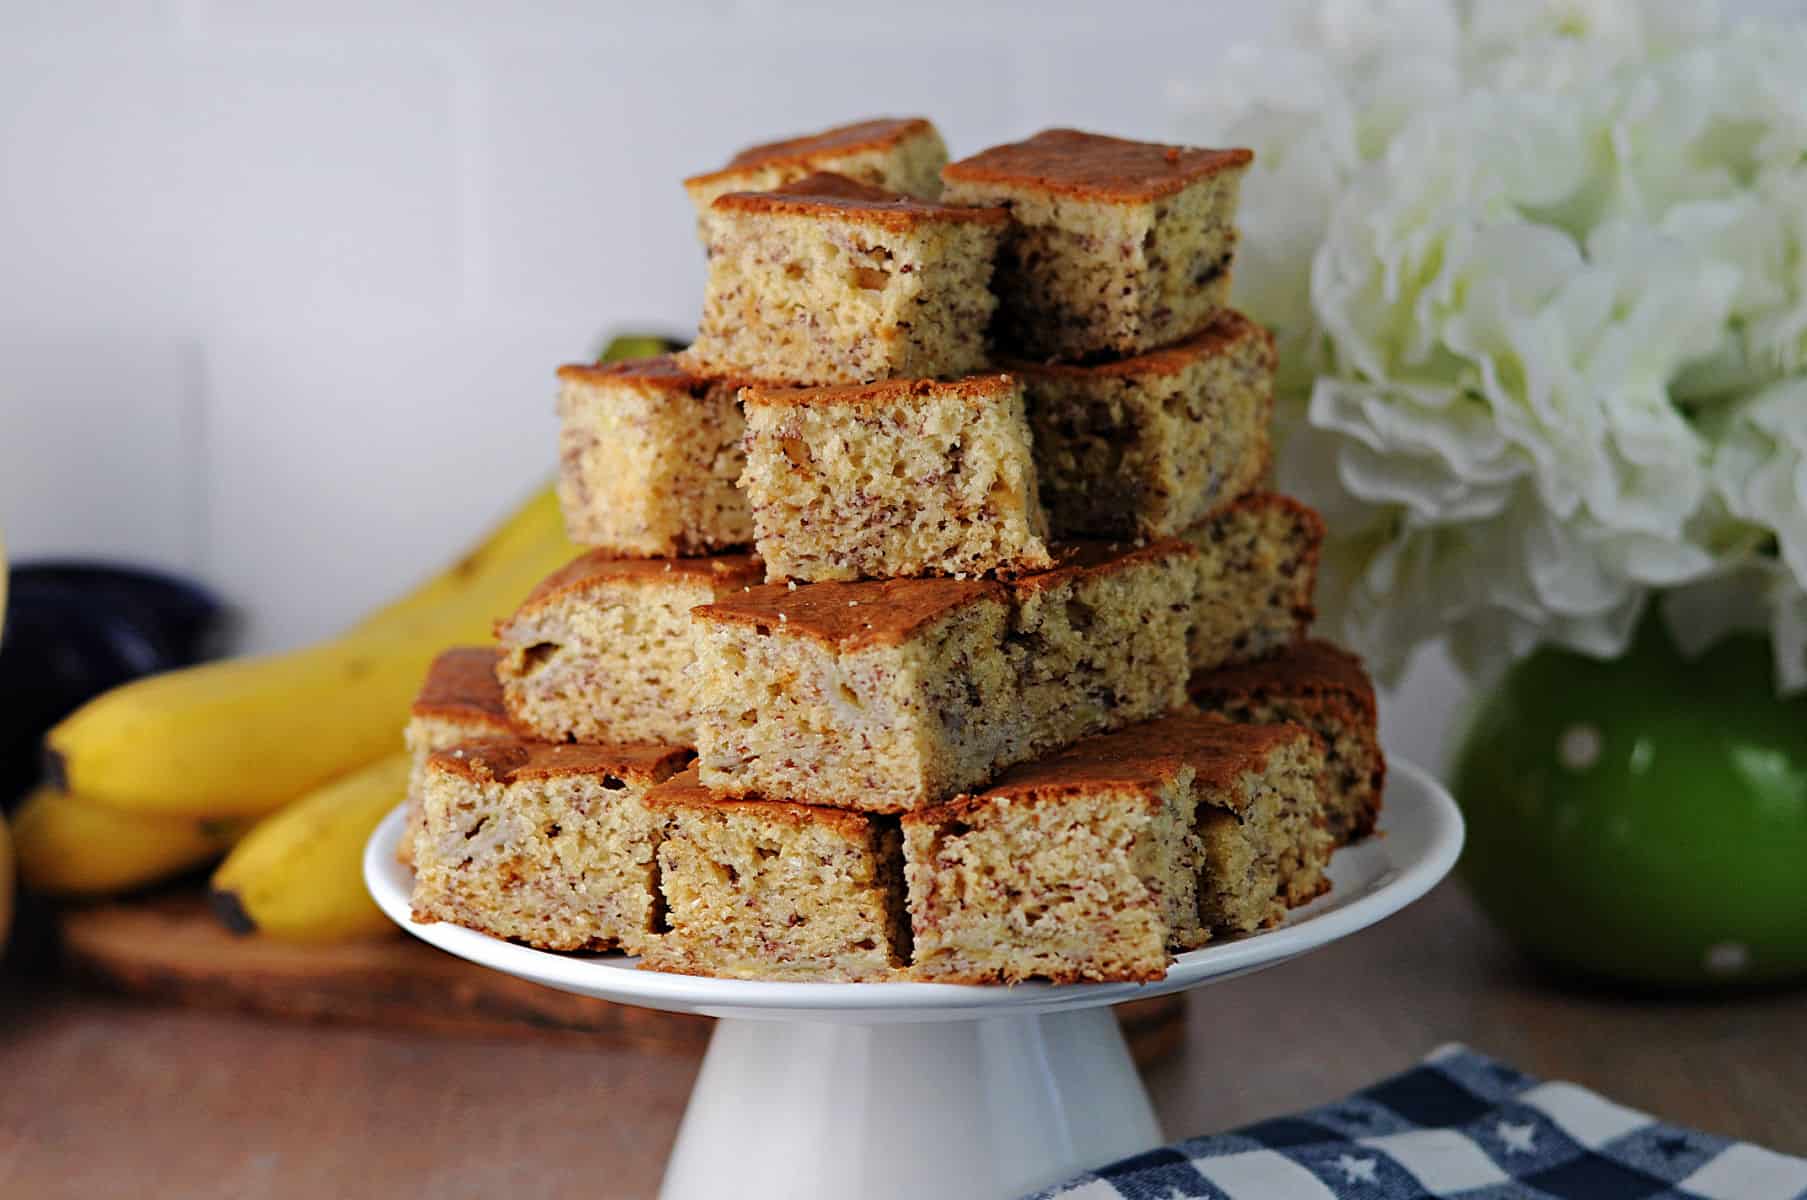 server piled high with squares of banana bread.